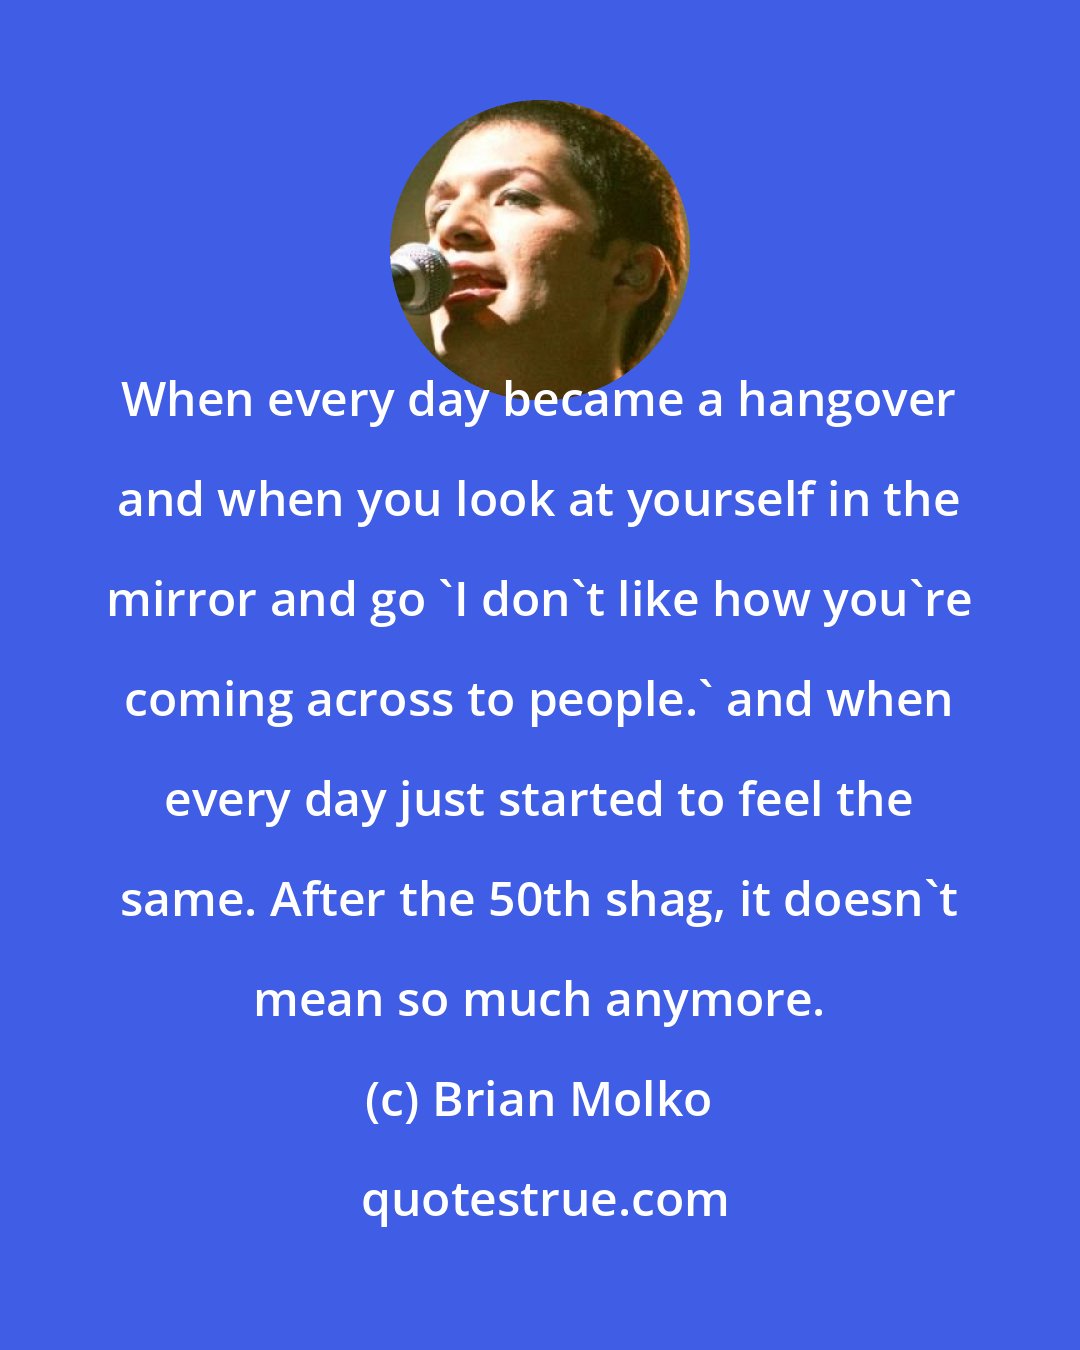 Brian Molko: When every day became a hangover and when you look at yourself in the mirror and go 'I don't like how you're coming across to people.' and when every day just started to feel the same. After the 50th shag, it doesn't mean so much anymore.